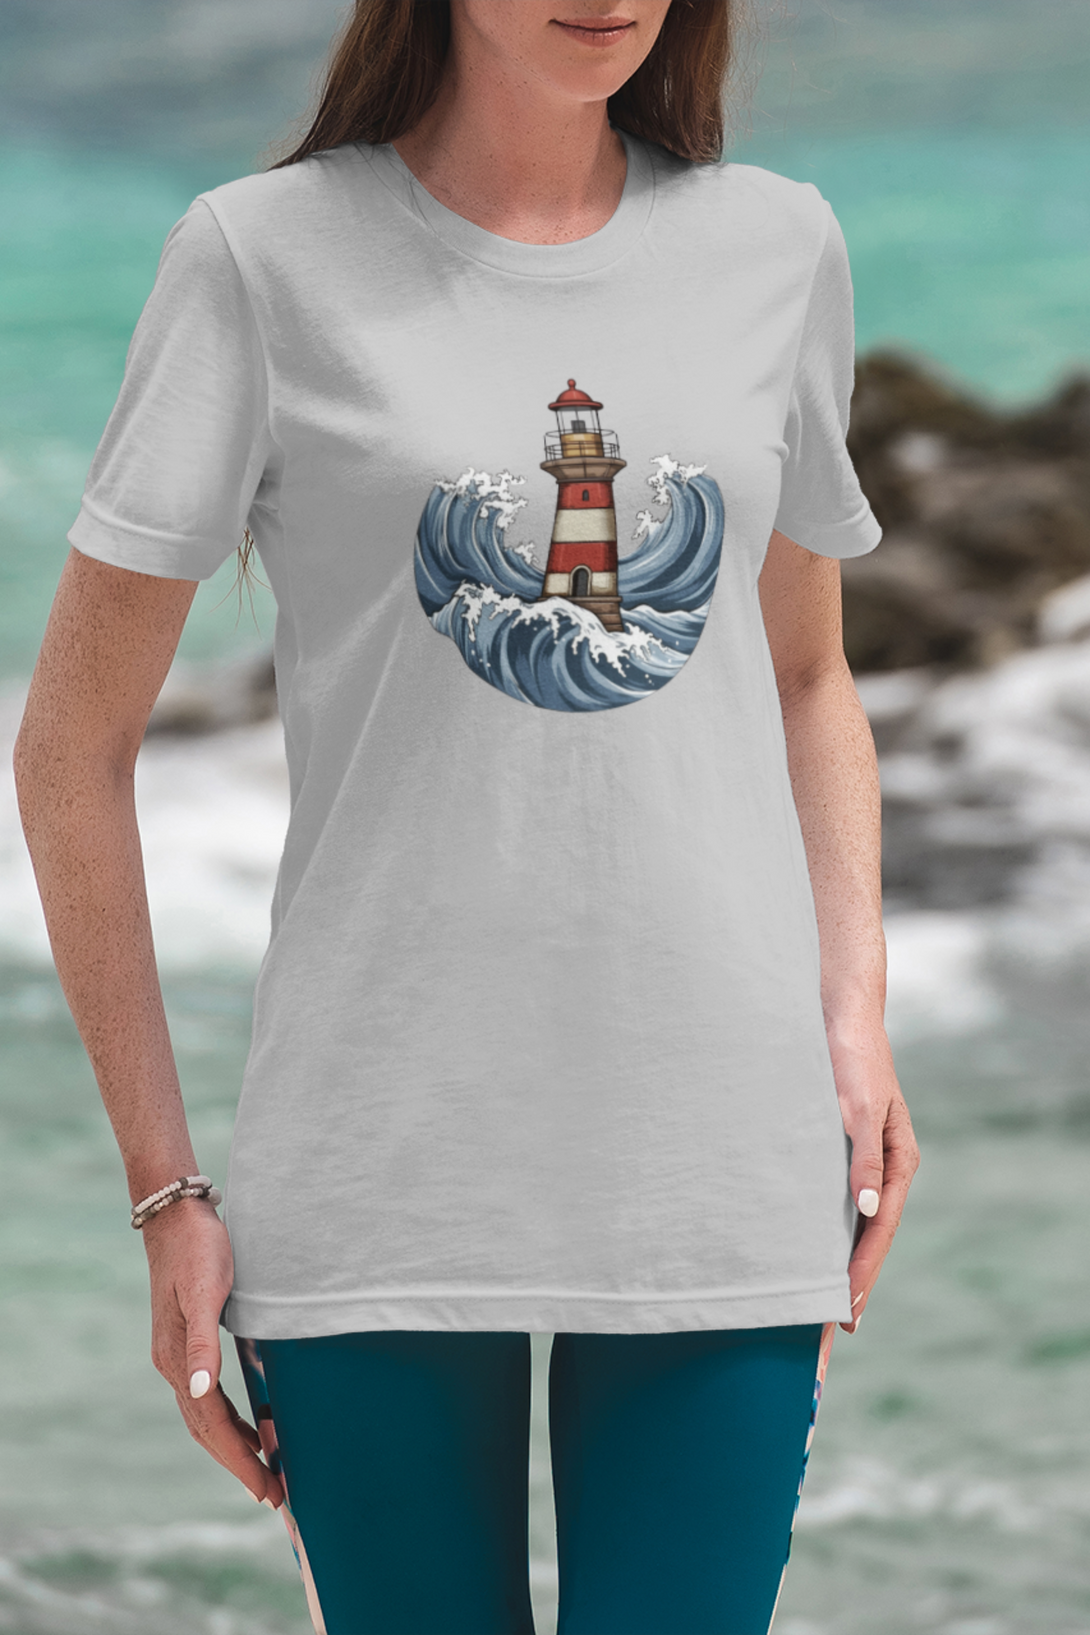 Lighthouse And Waves Printed T-Shirt For Women - WowWaves - 6